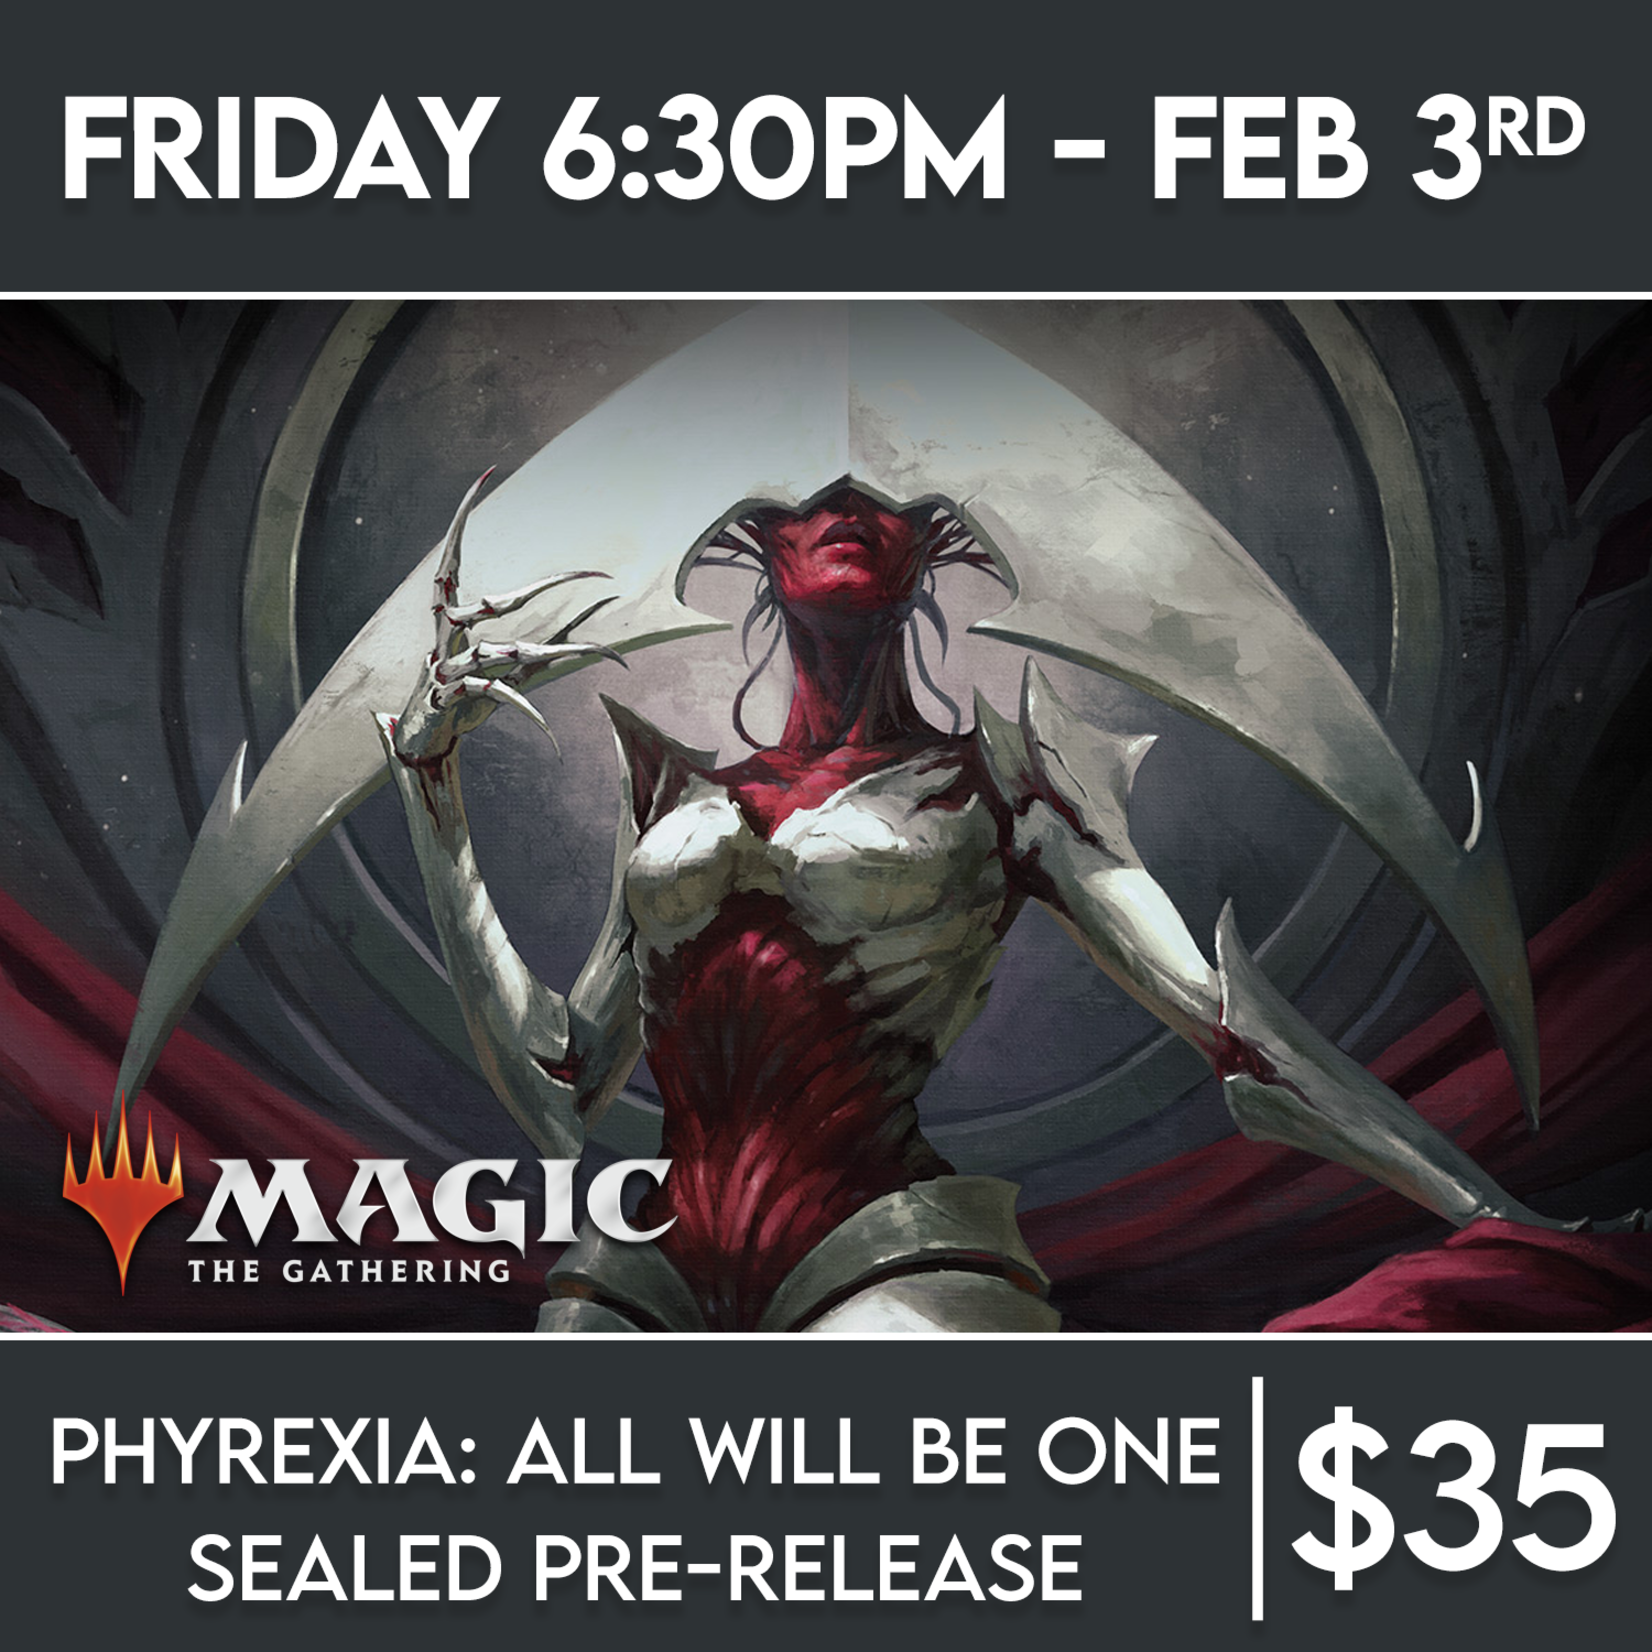 Magic: the Gathering Events 02/03 Friday @ 6:30 PM - Phyrexia: All Will Be One PRE-RELEASE